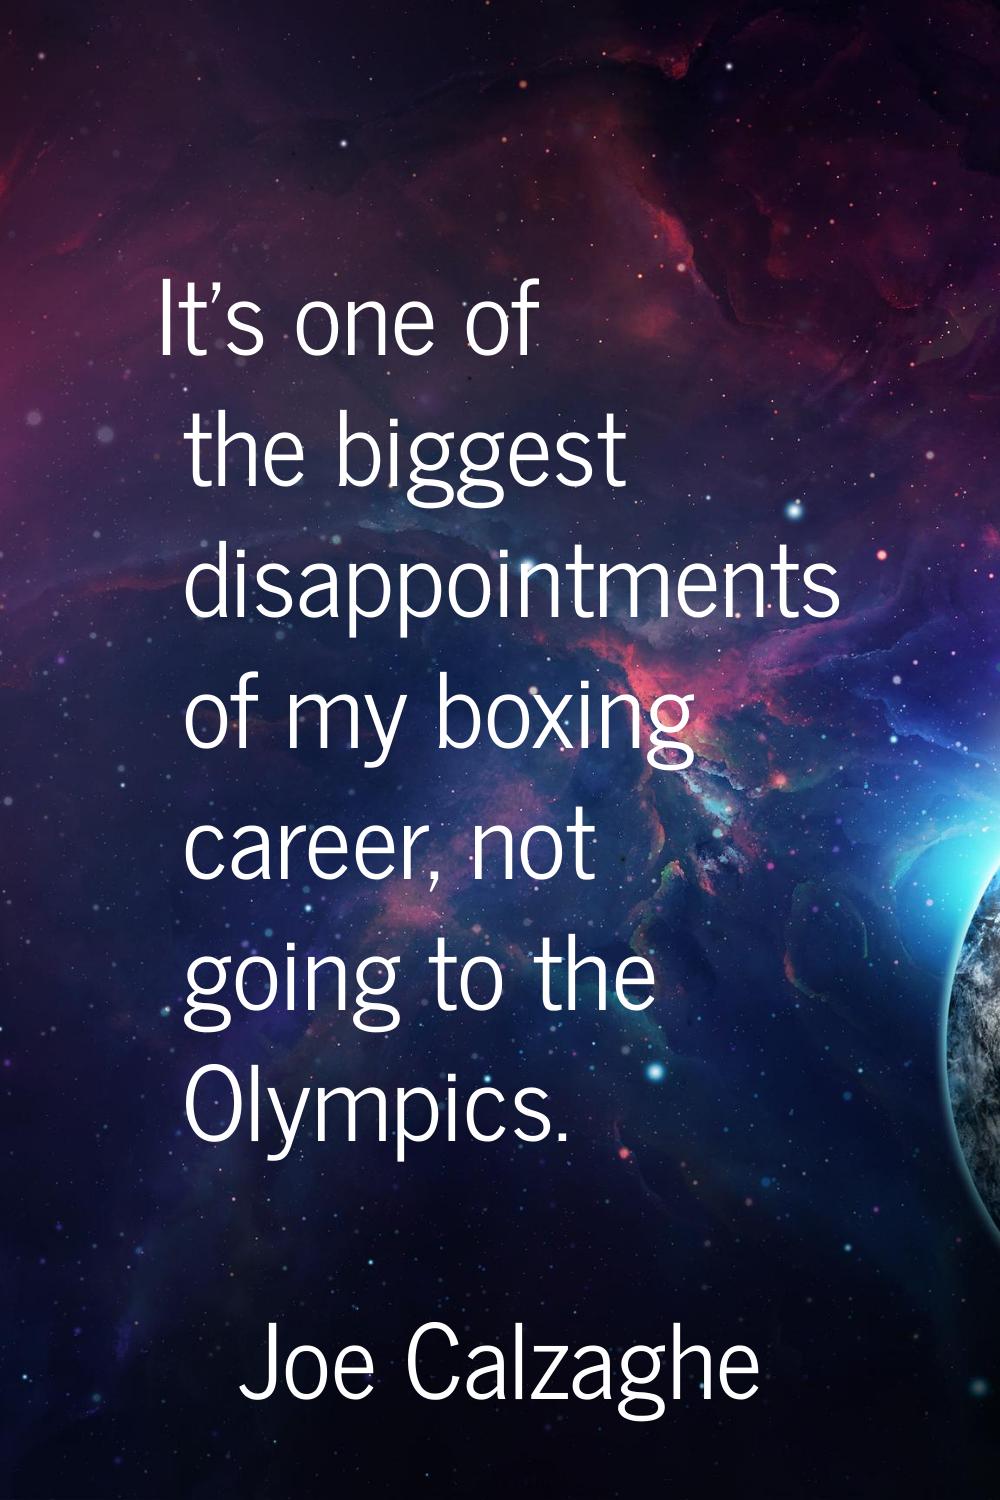 It's one of the biggest disappointments of my boxing career, not going to the Olympics.